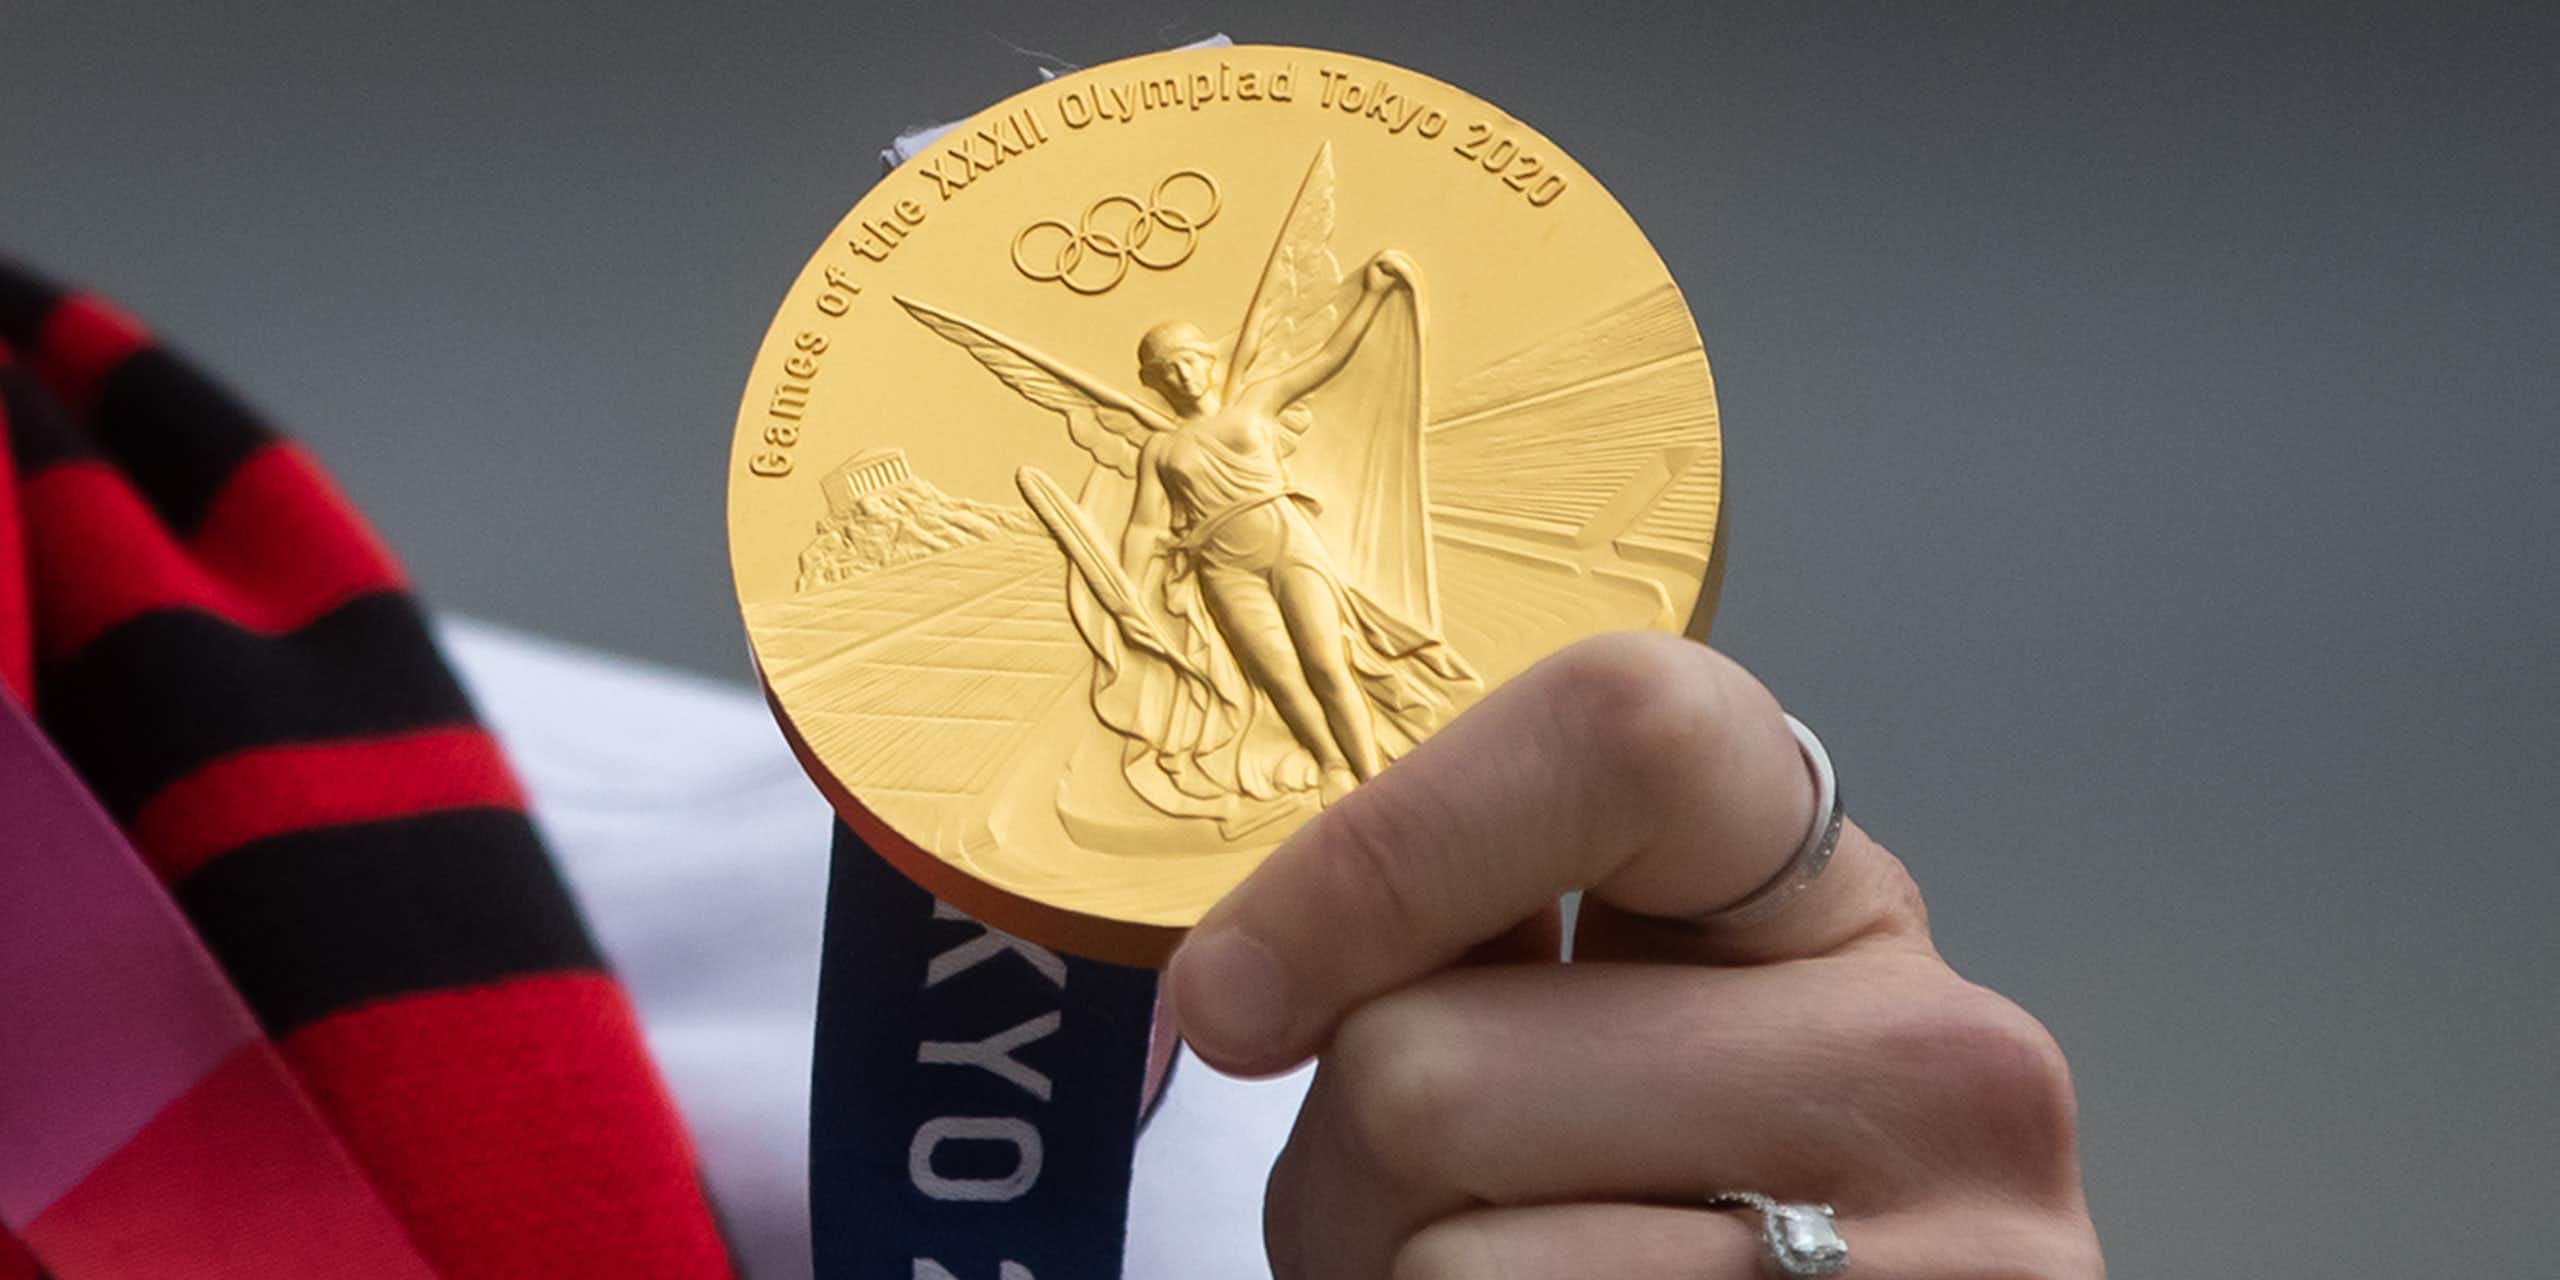 Close up of a hand holding up a gold medal from the Tokyo 2020 Olympics